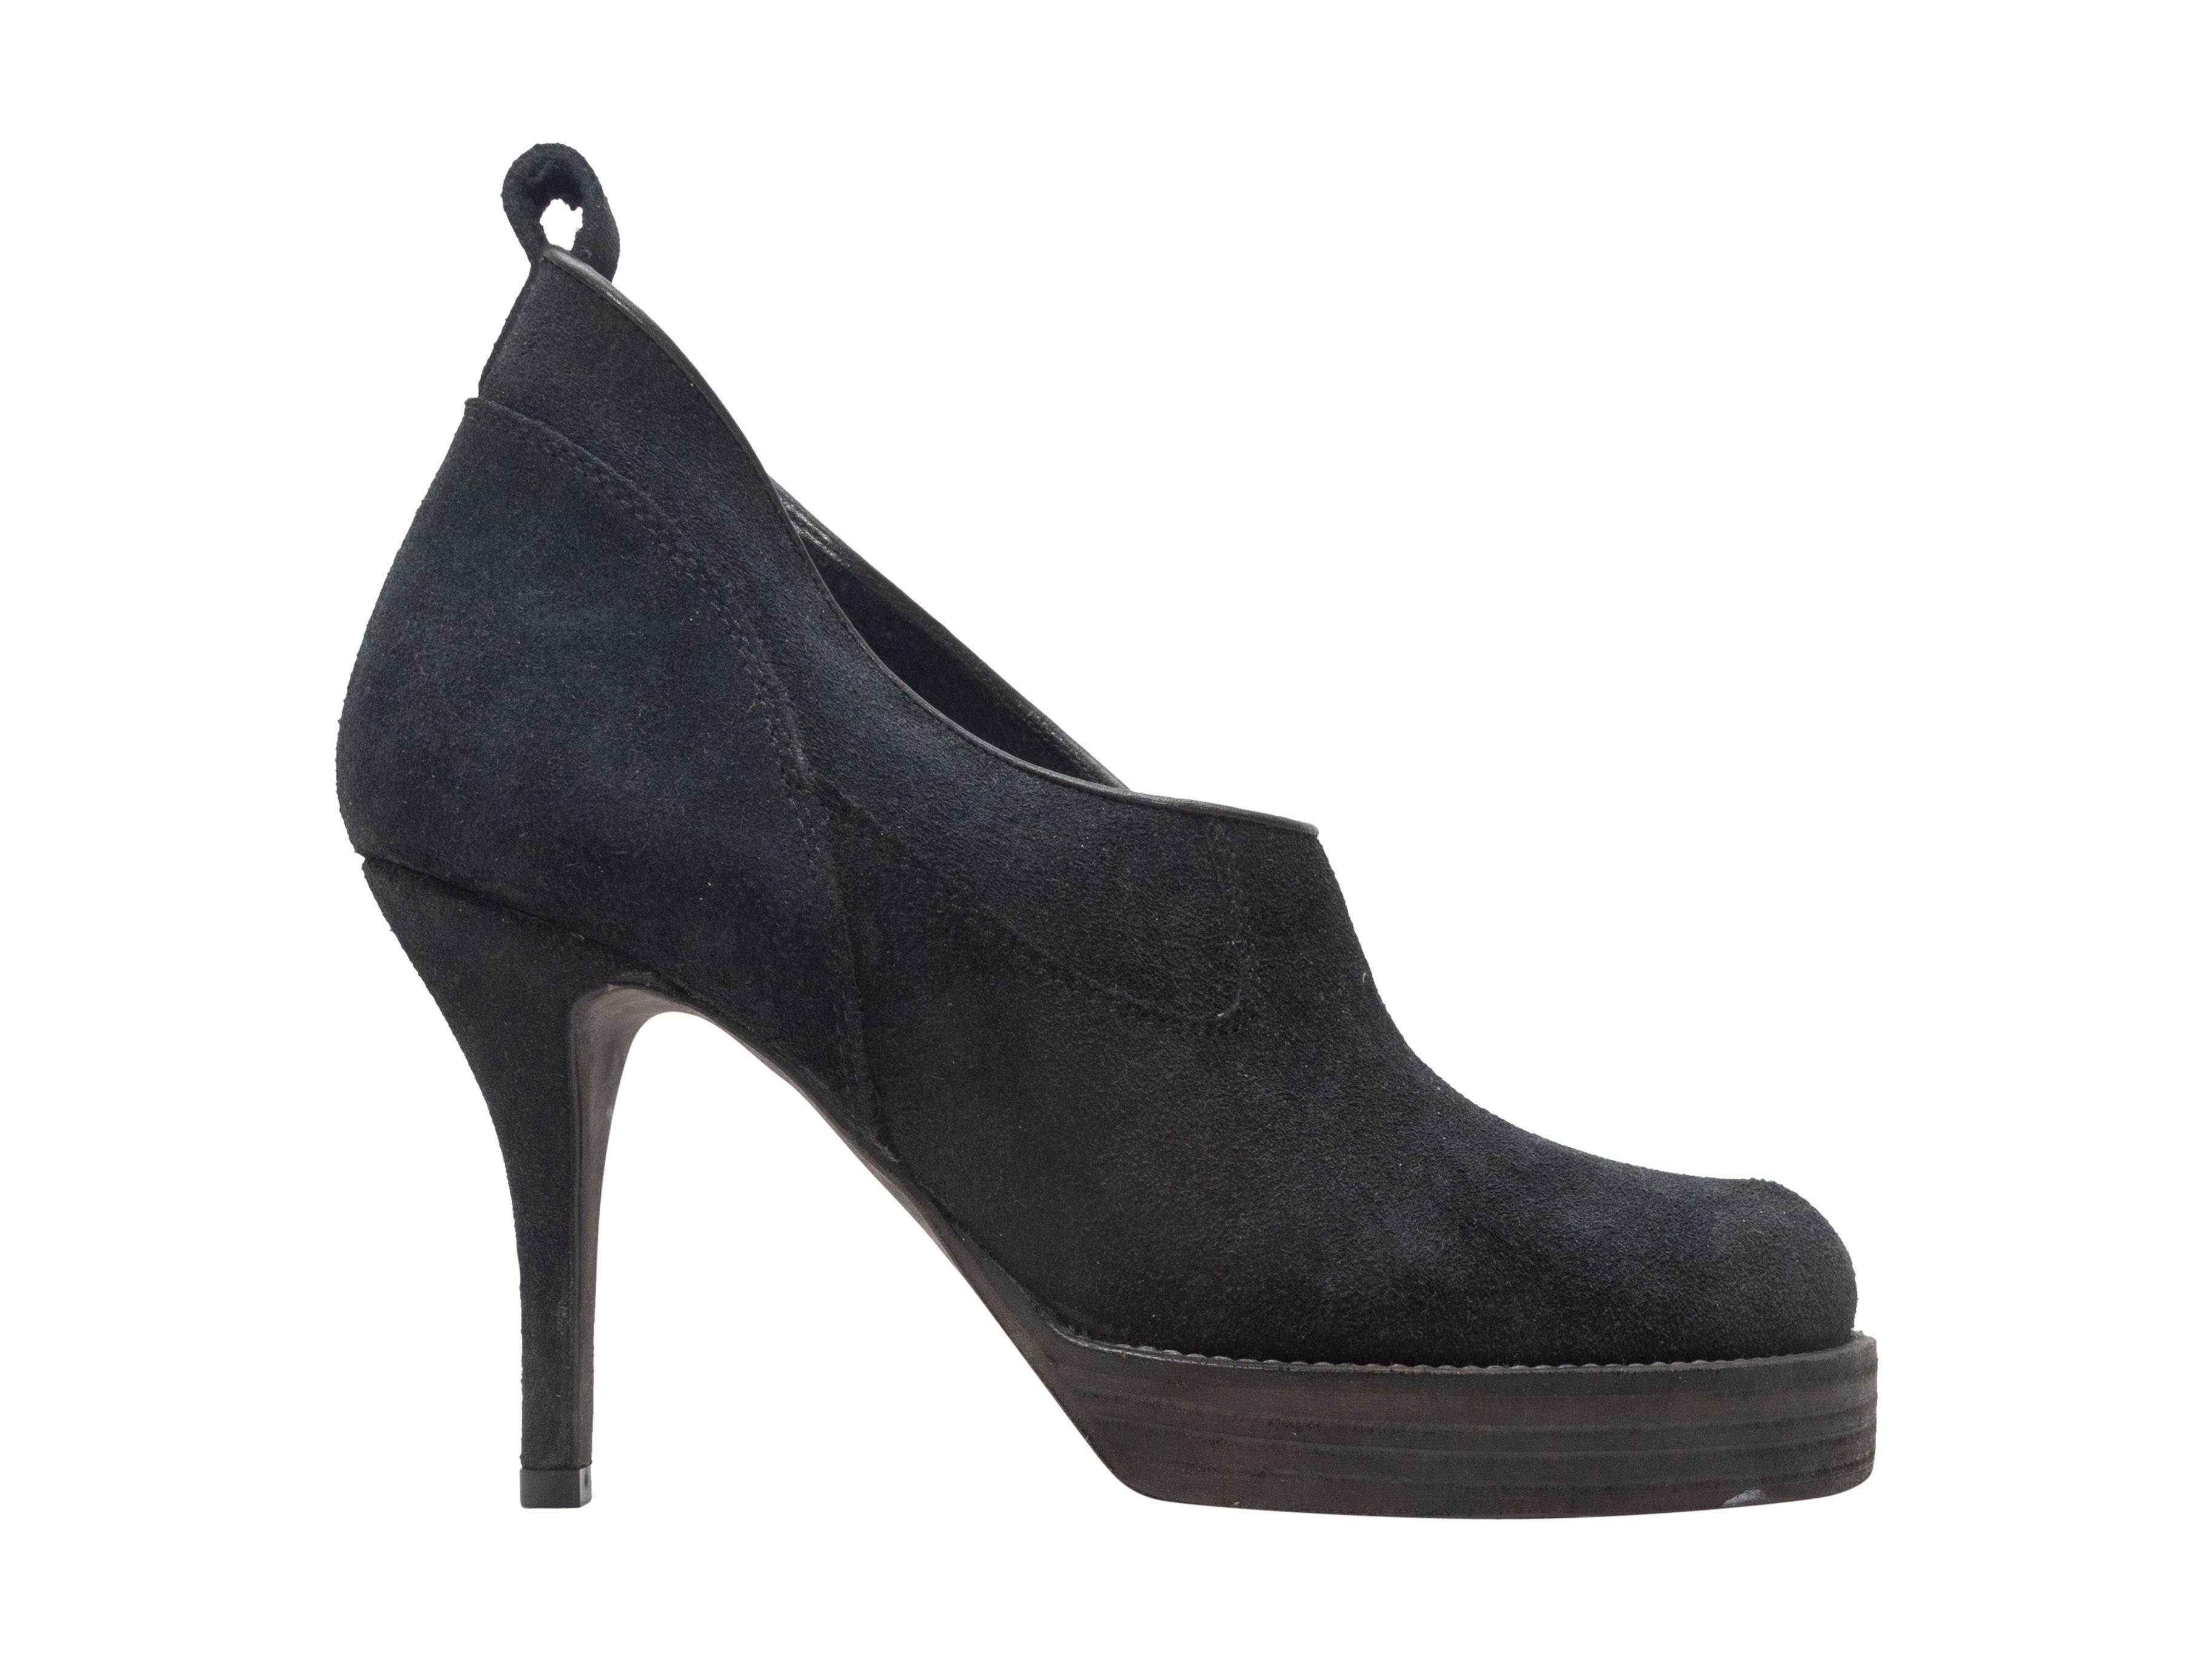 Rick Owens Black Suede Bootie Pumps In Good Condition For Sale In New York, NY